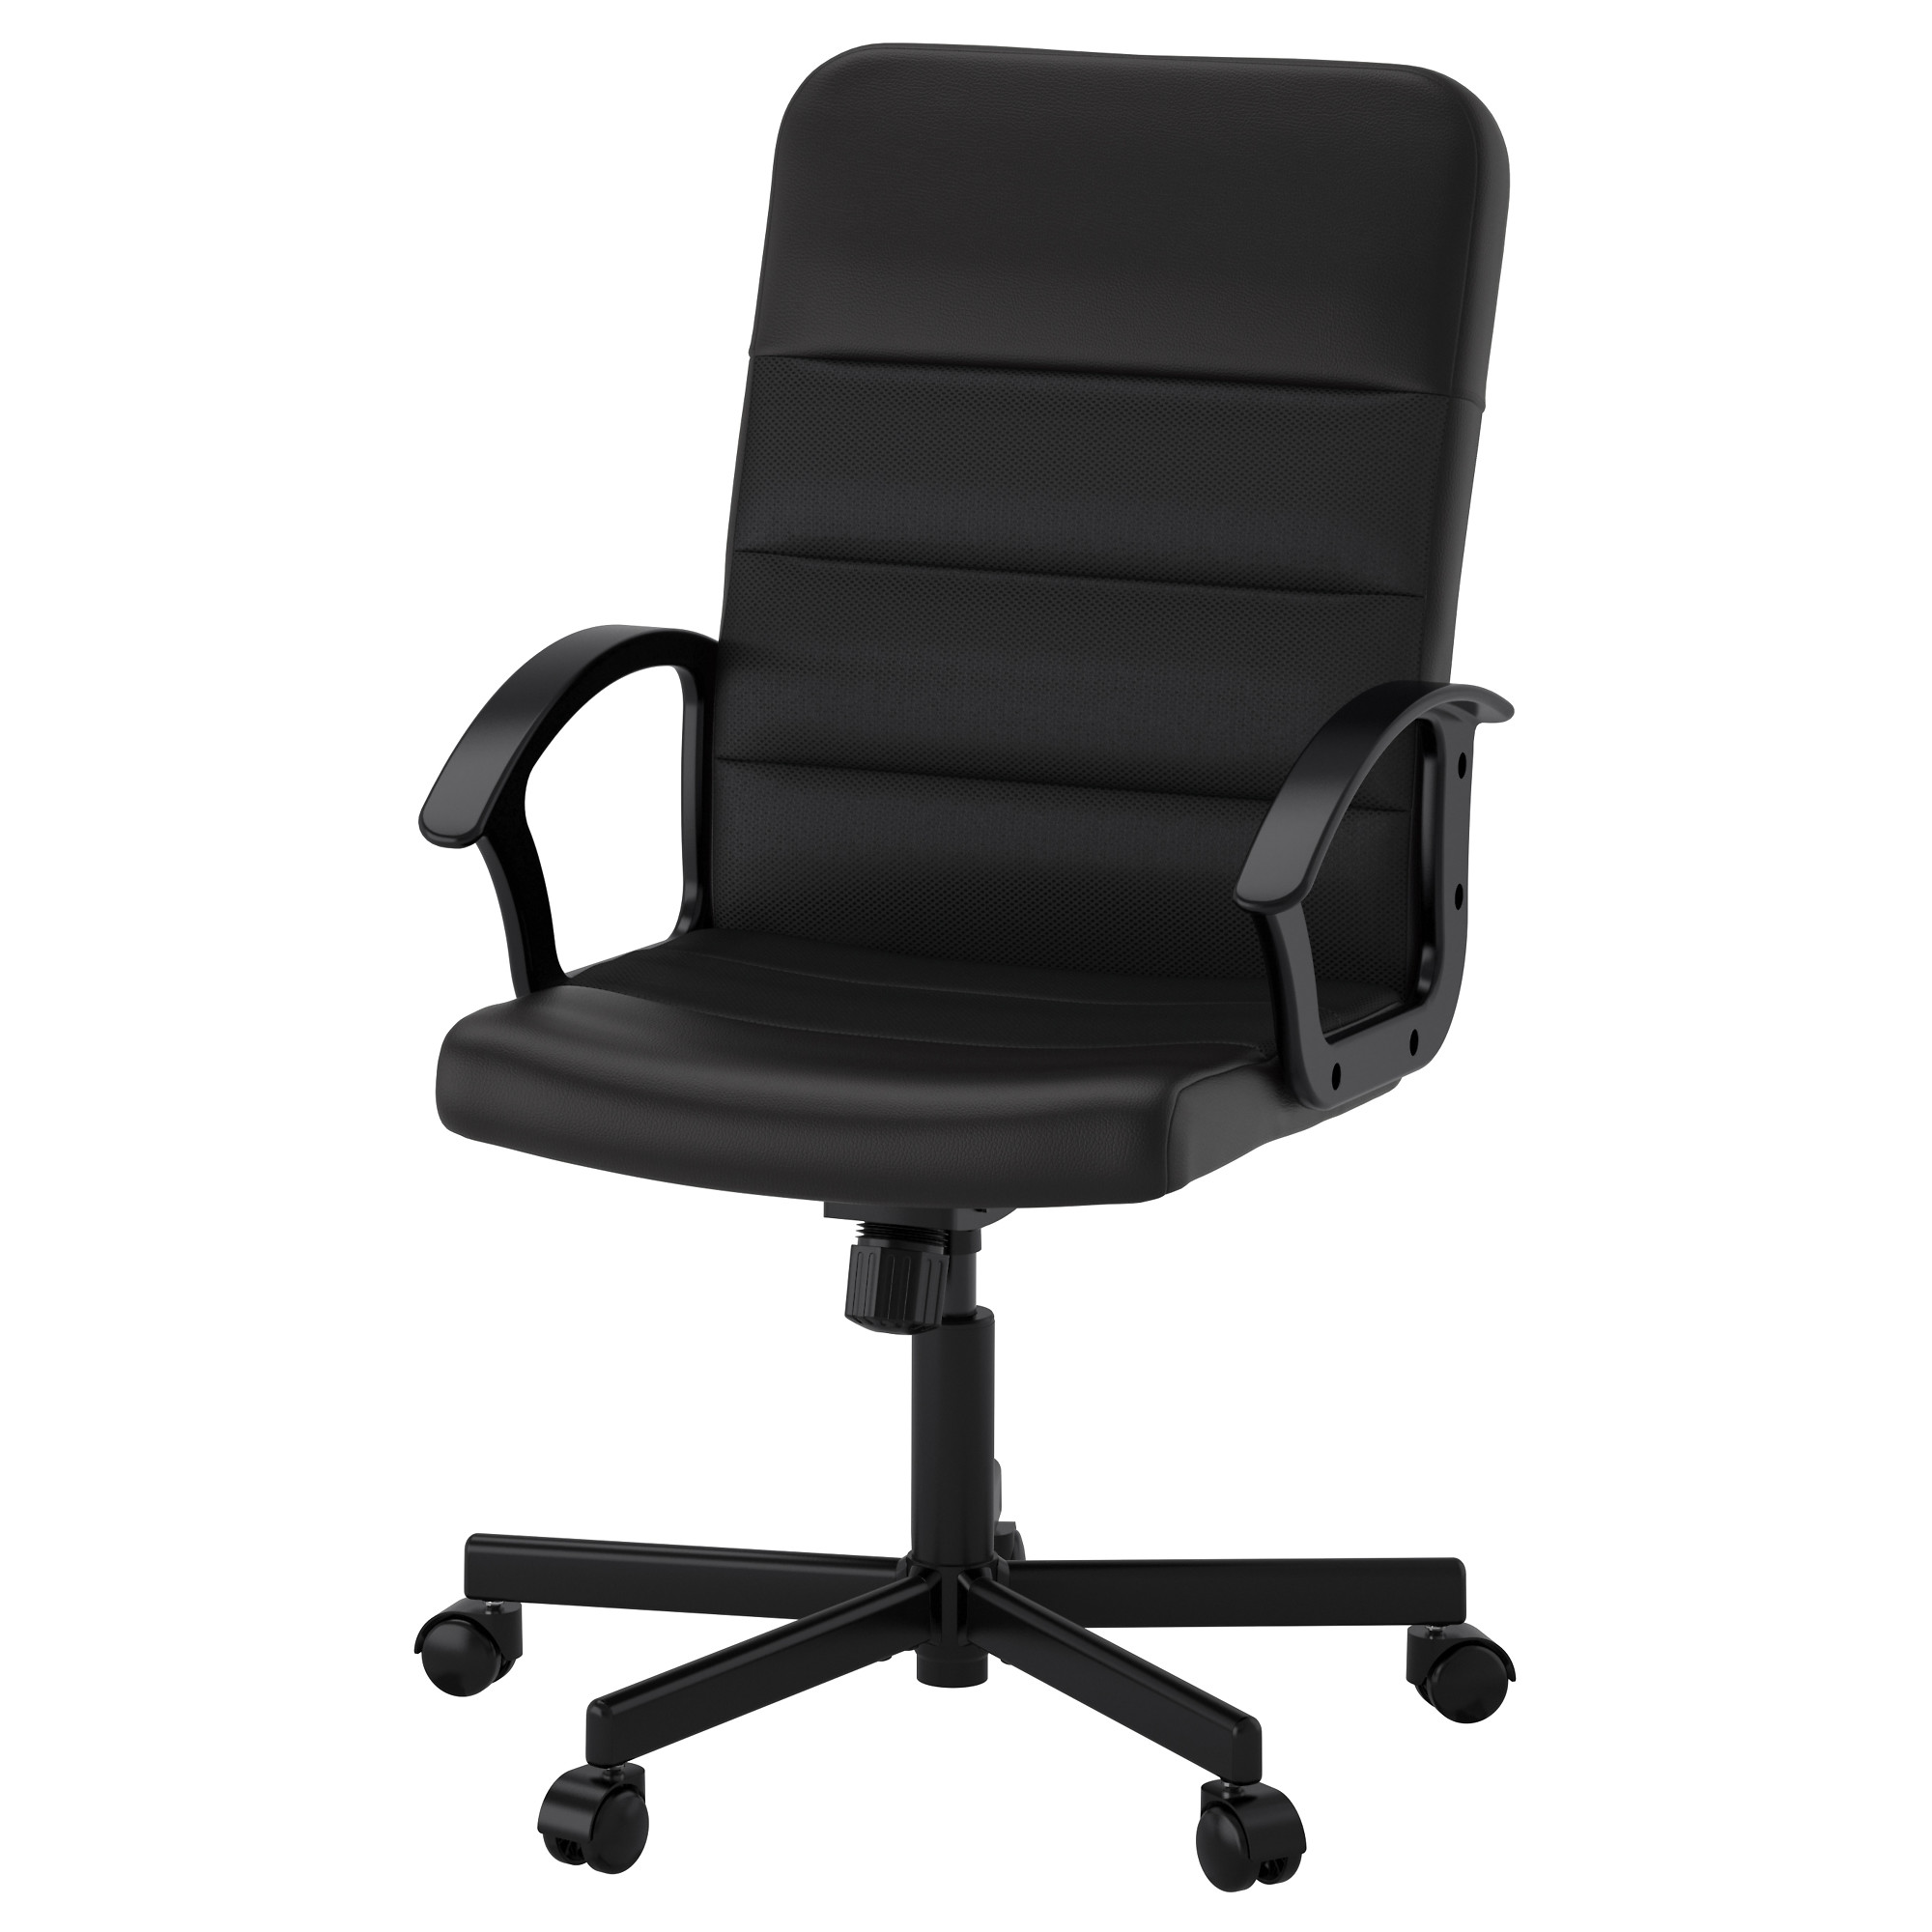 swivel chairs renberget swivel chair, bomstad black tested for: 242 lb 8 oz width: 23 RZERGIG